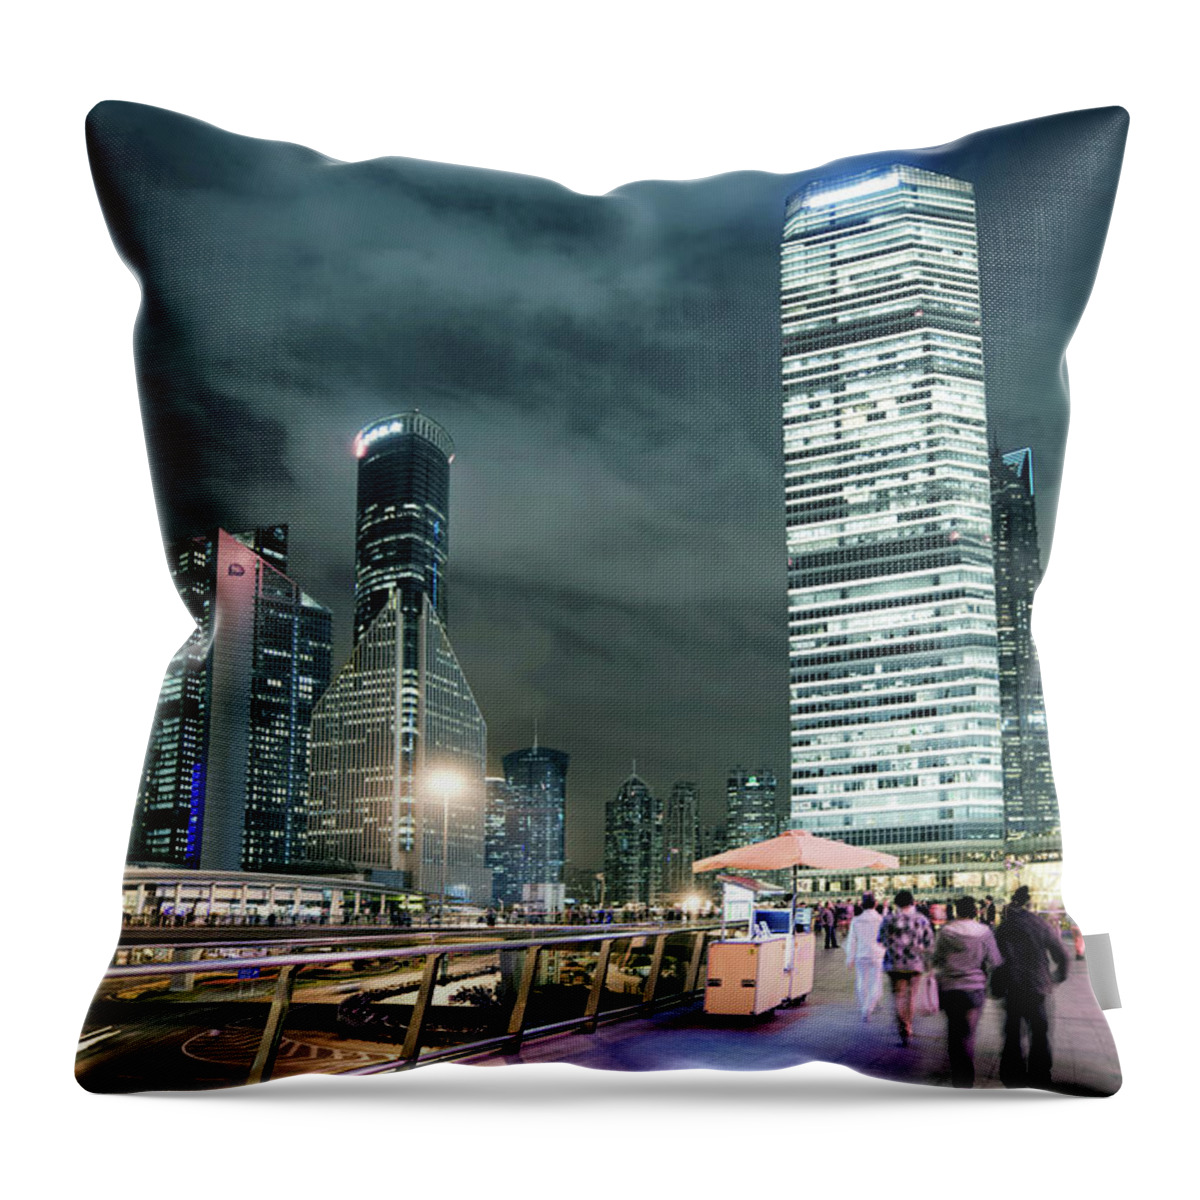 Pedestrian Throw Pillow featuring the photograph Stroll At Mid-level Shanghai by Andy Brandl